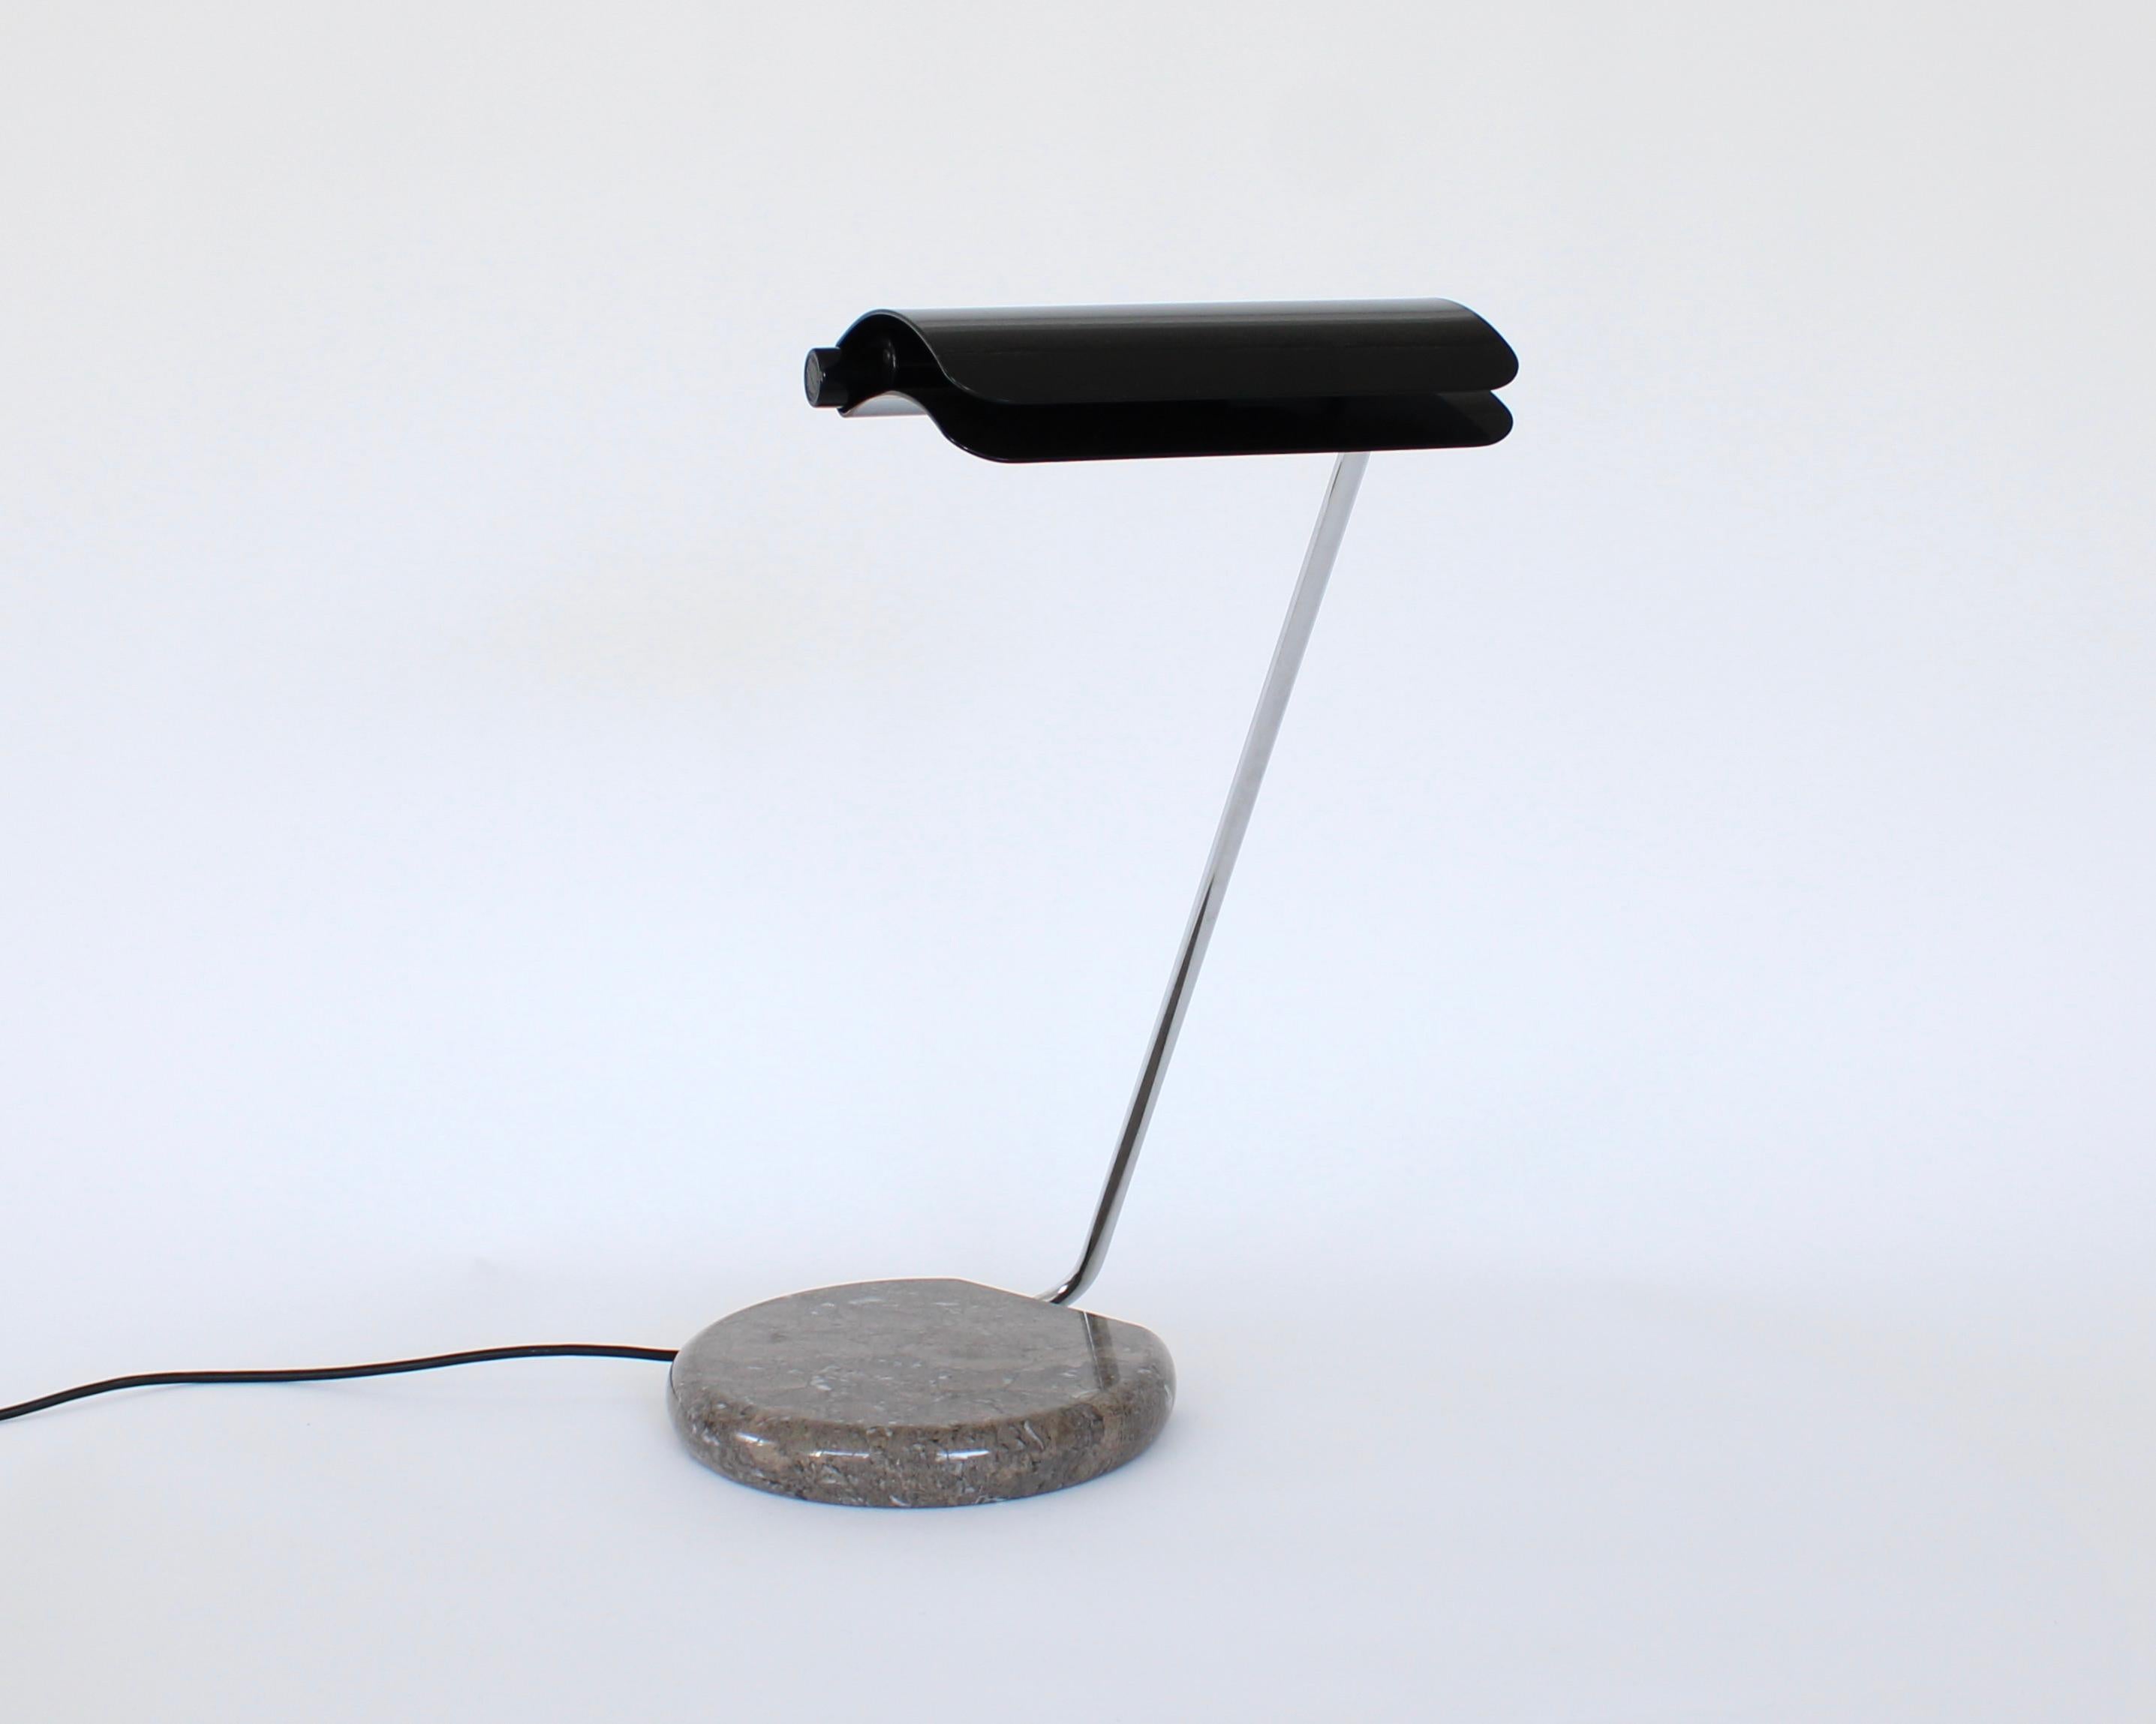 This model Tegola lamp was designed by Bruno Gecchelin for Skipper and Pollux. 
The base comes in brown Grigio marble with a black lacquered metal shade. 
Tegola means roof tile in Italian which the shade resembles.
This lamp was produced until